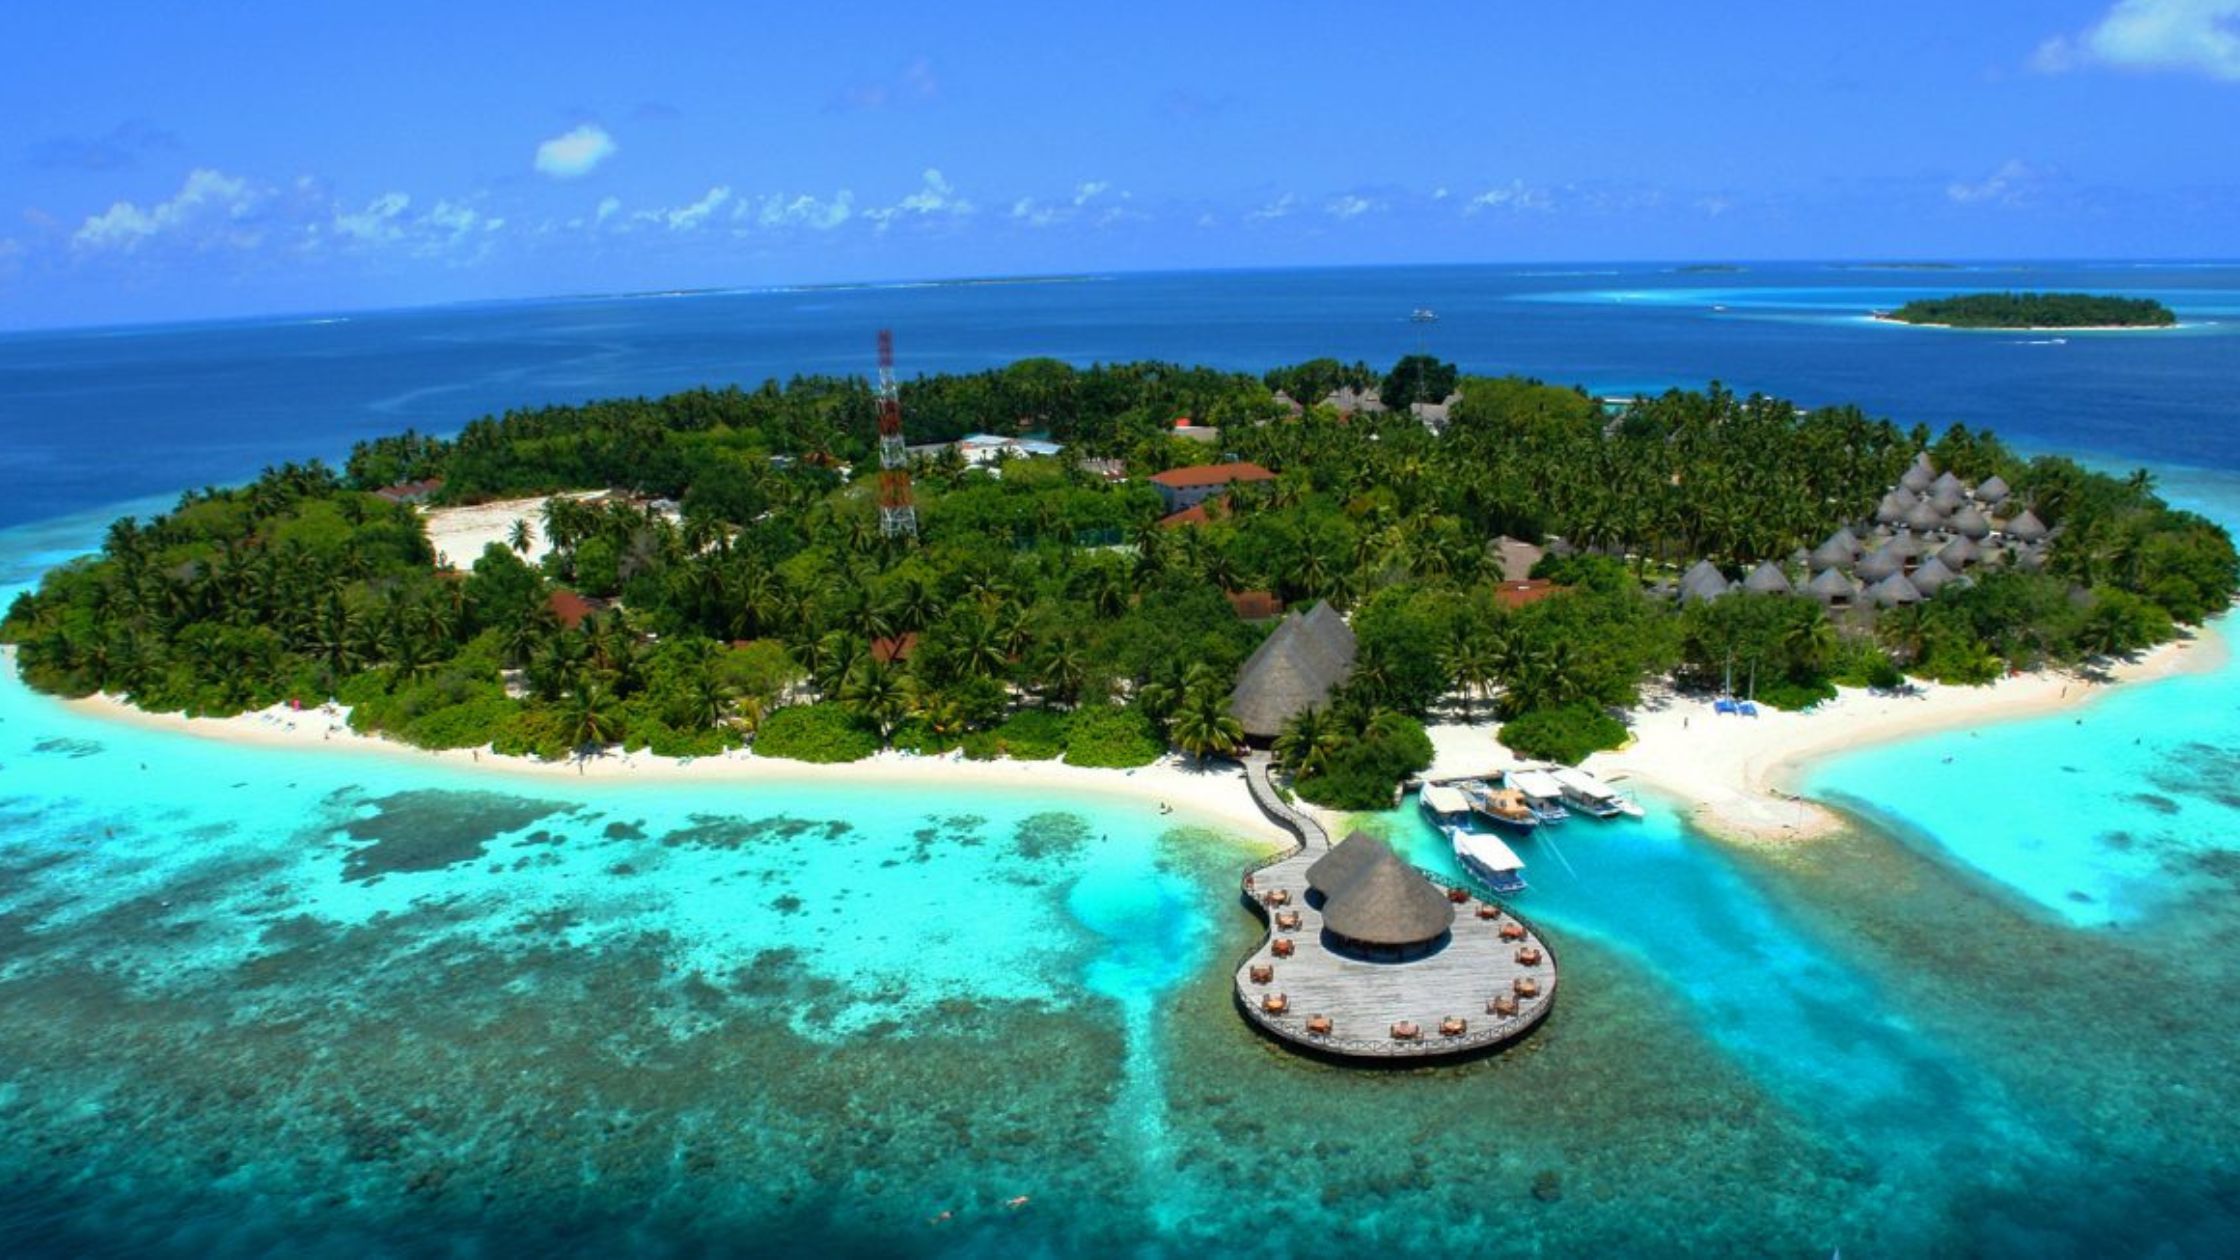 Bandos Maldives: Your Perfect Island Escape for Luxury, Adventure, and Serenity